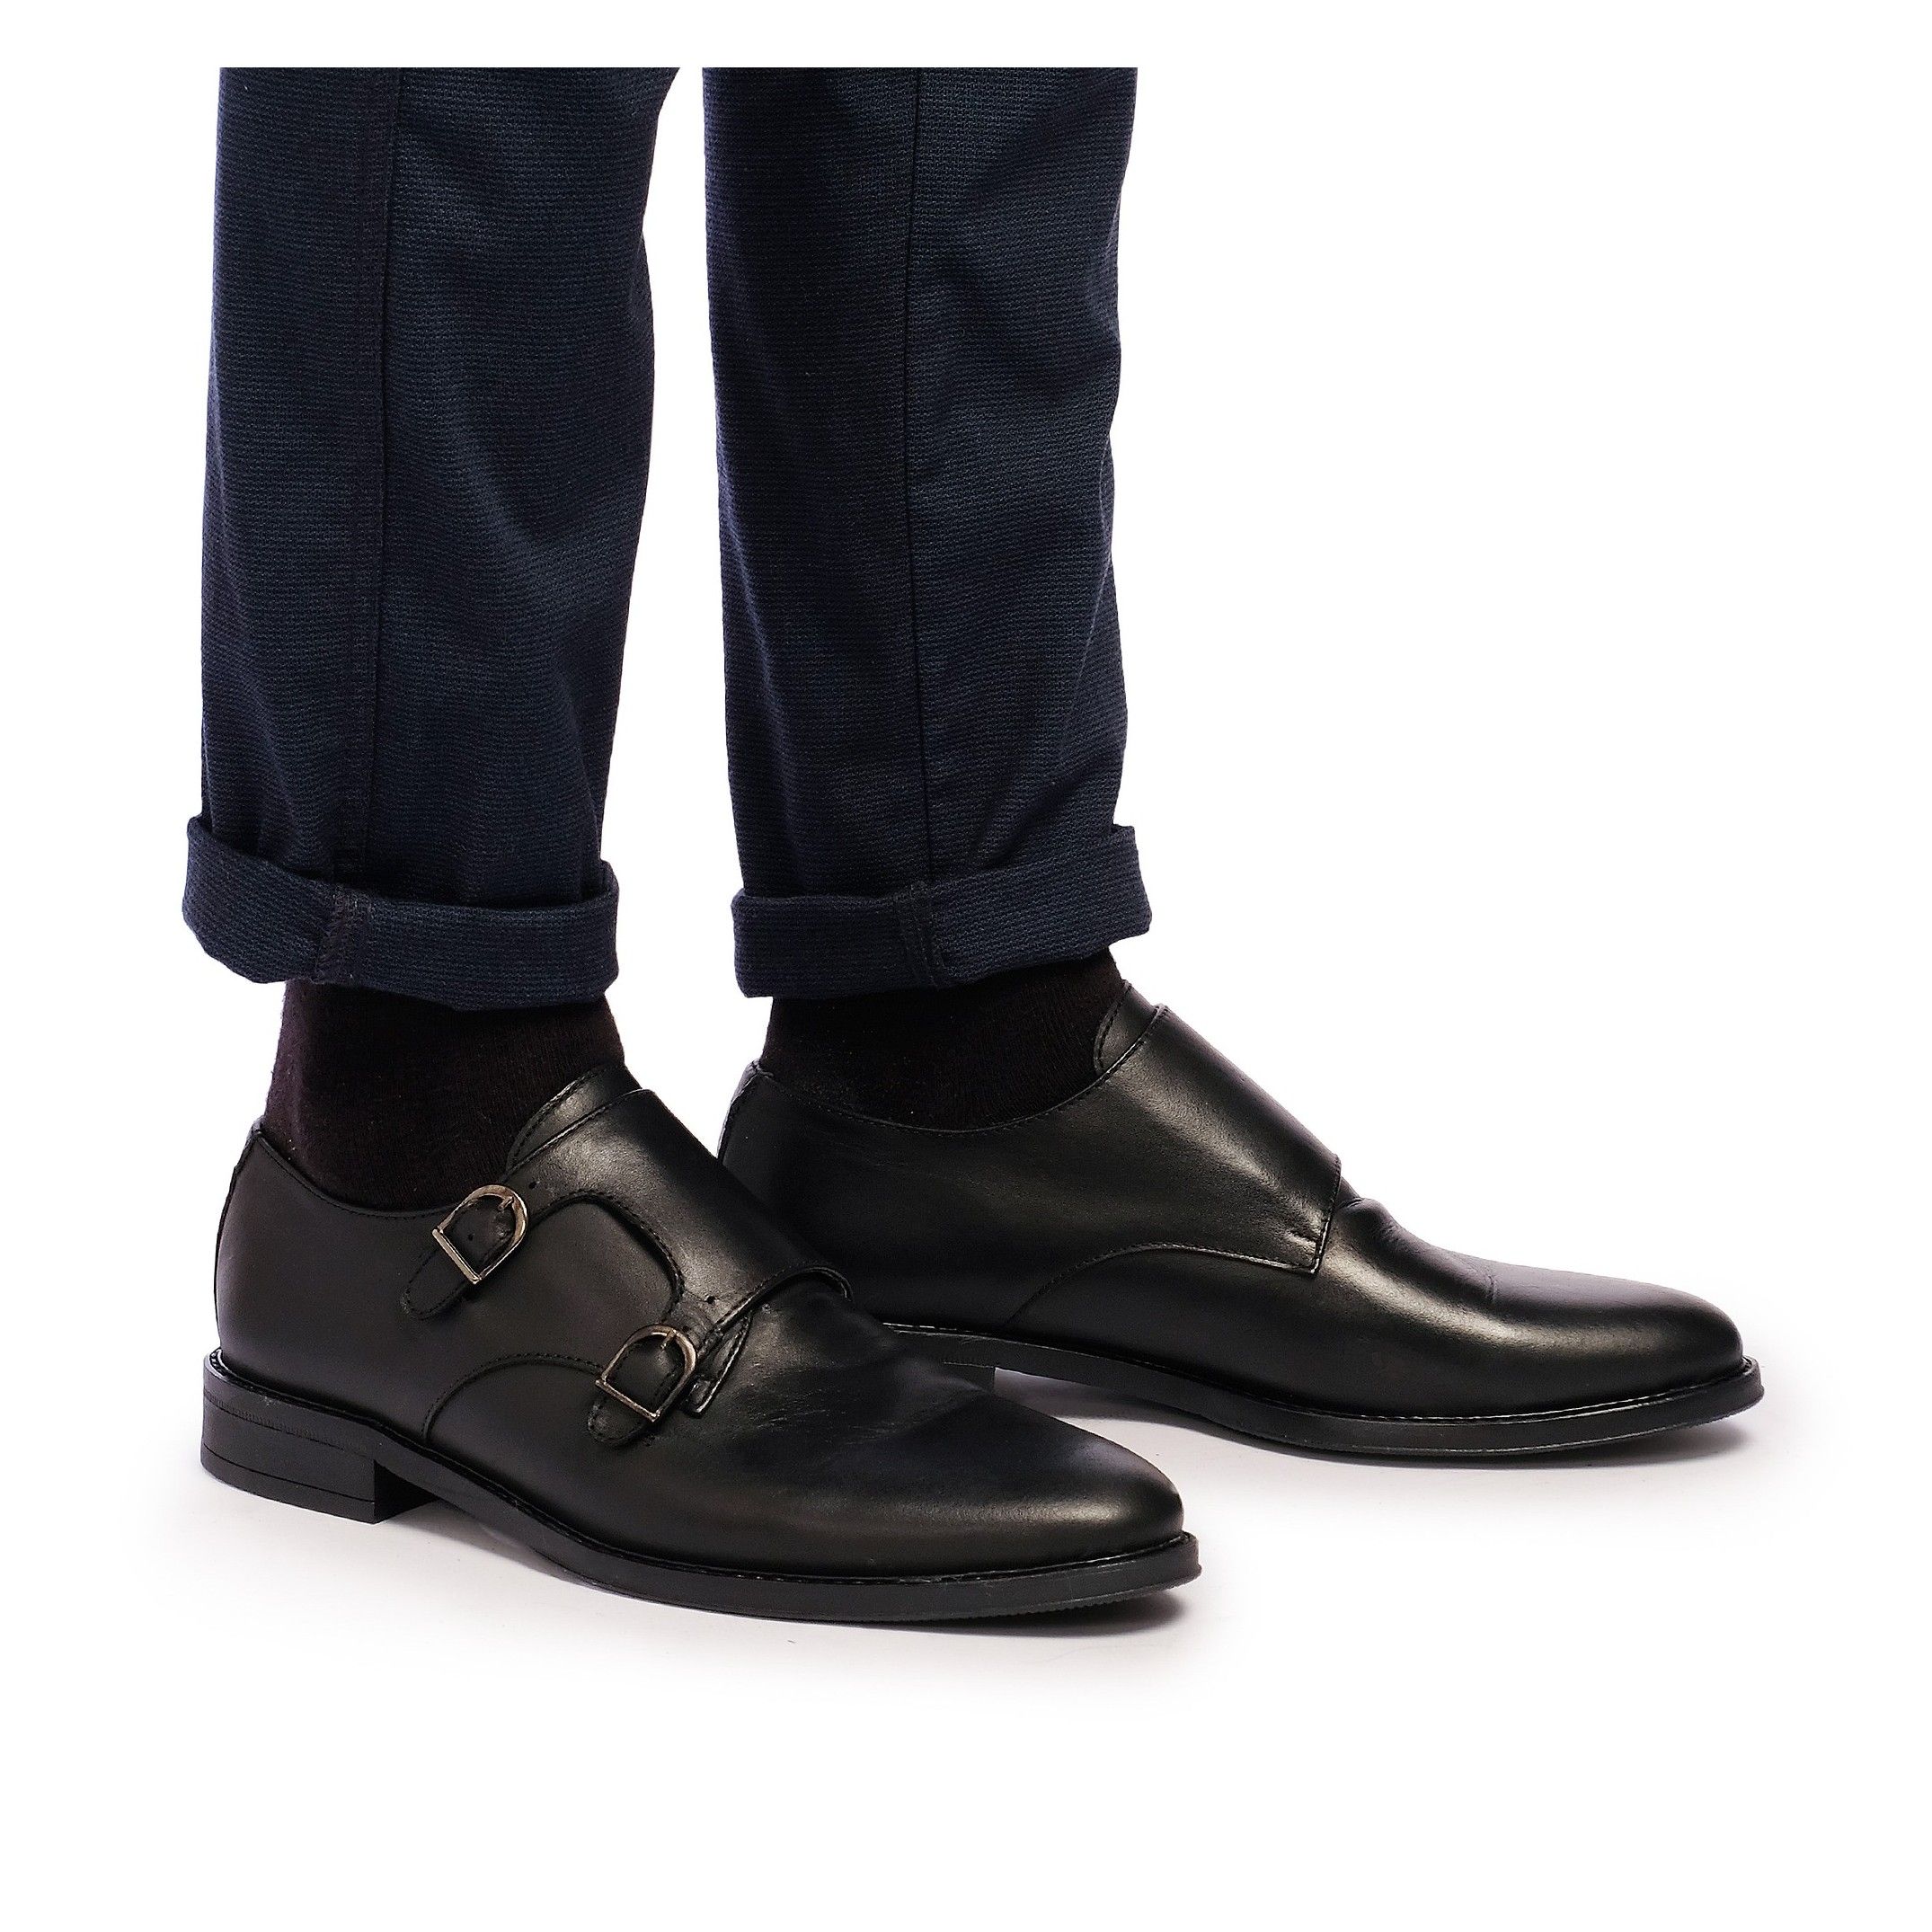 Monk shoes to dress for men. Upper and inner made of leather. Laces closure. Rubber sole. Made in Spain.